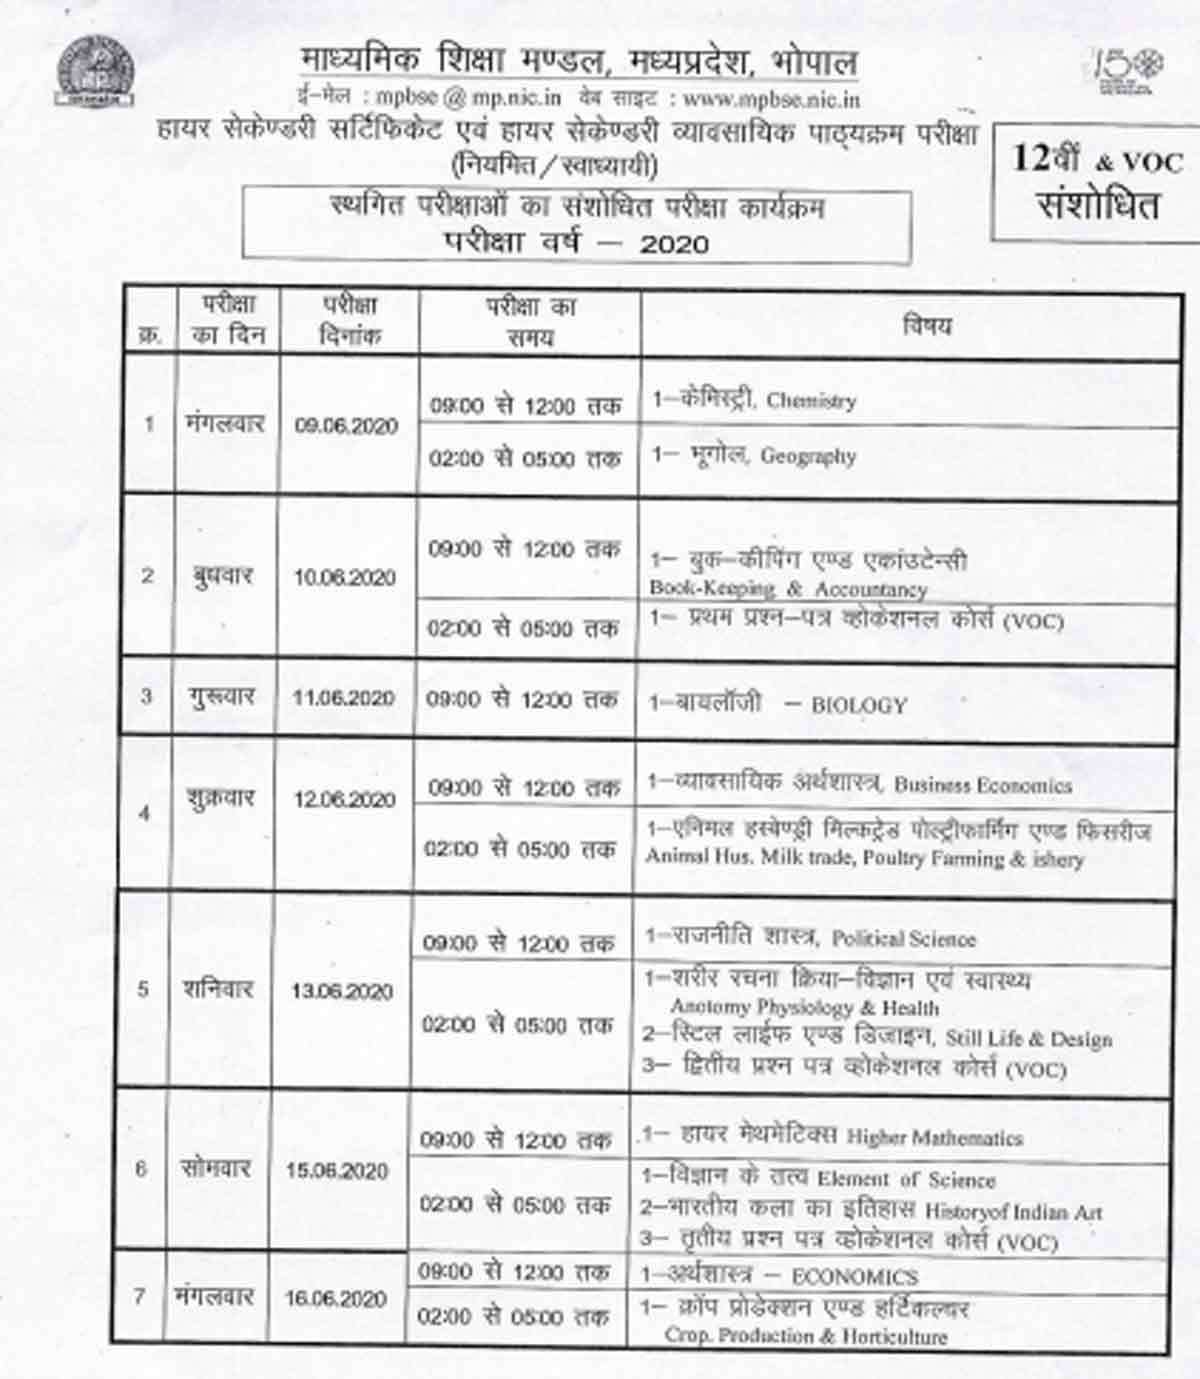 Revised timetable for MP Board Class 12th exams